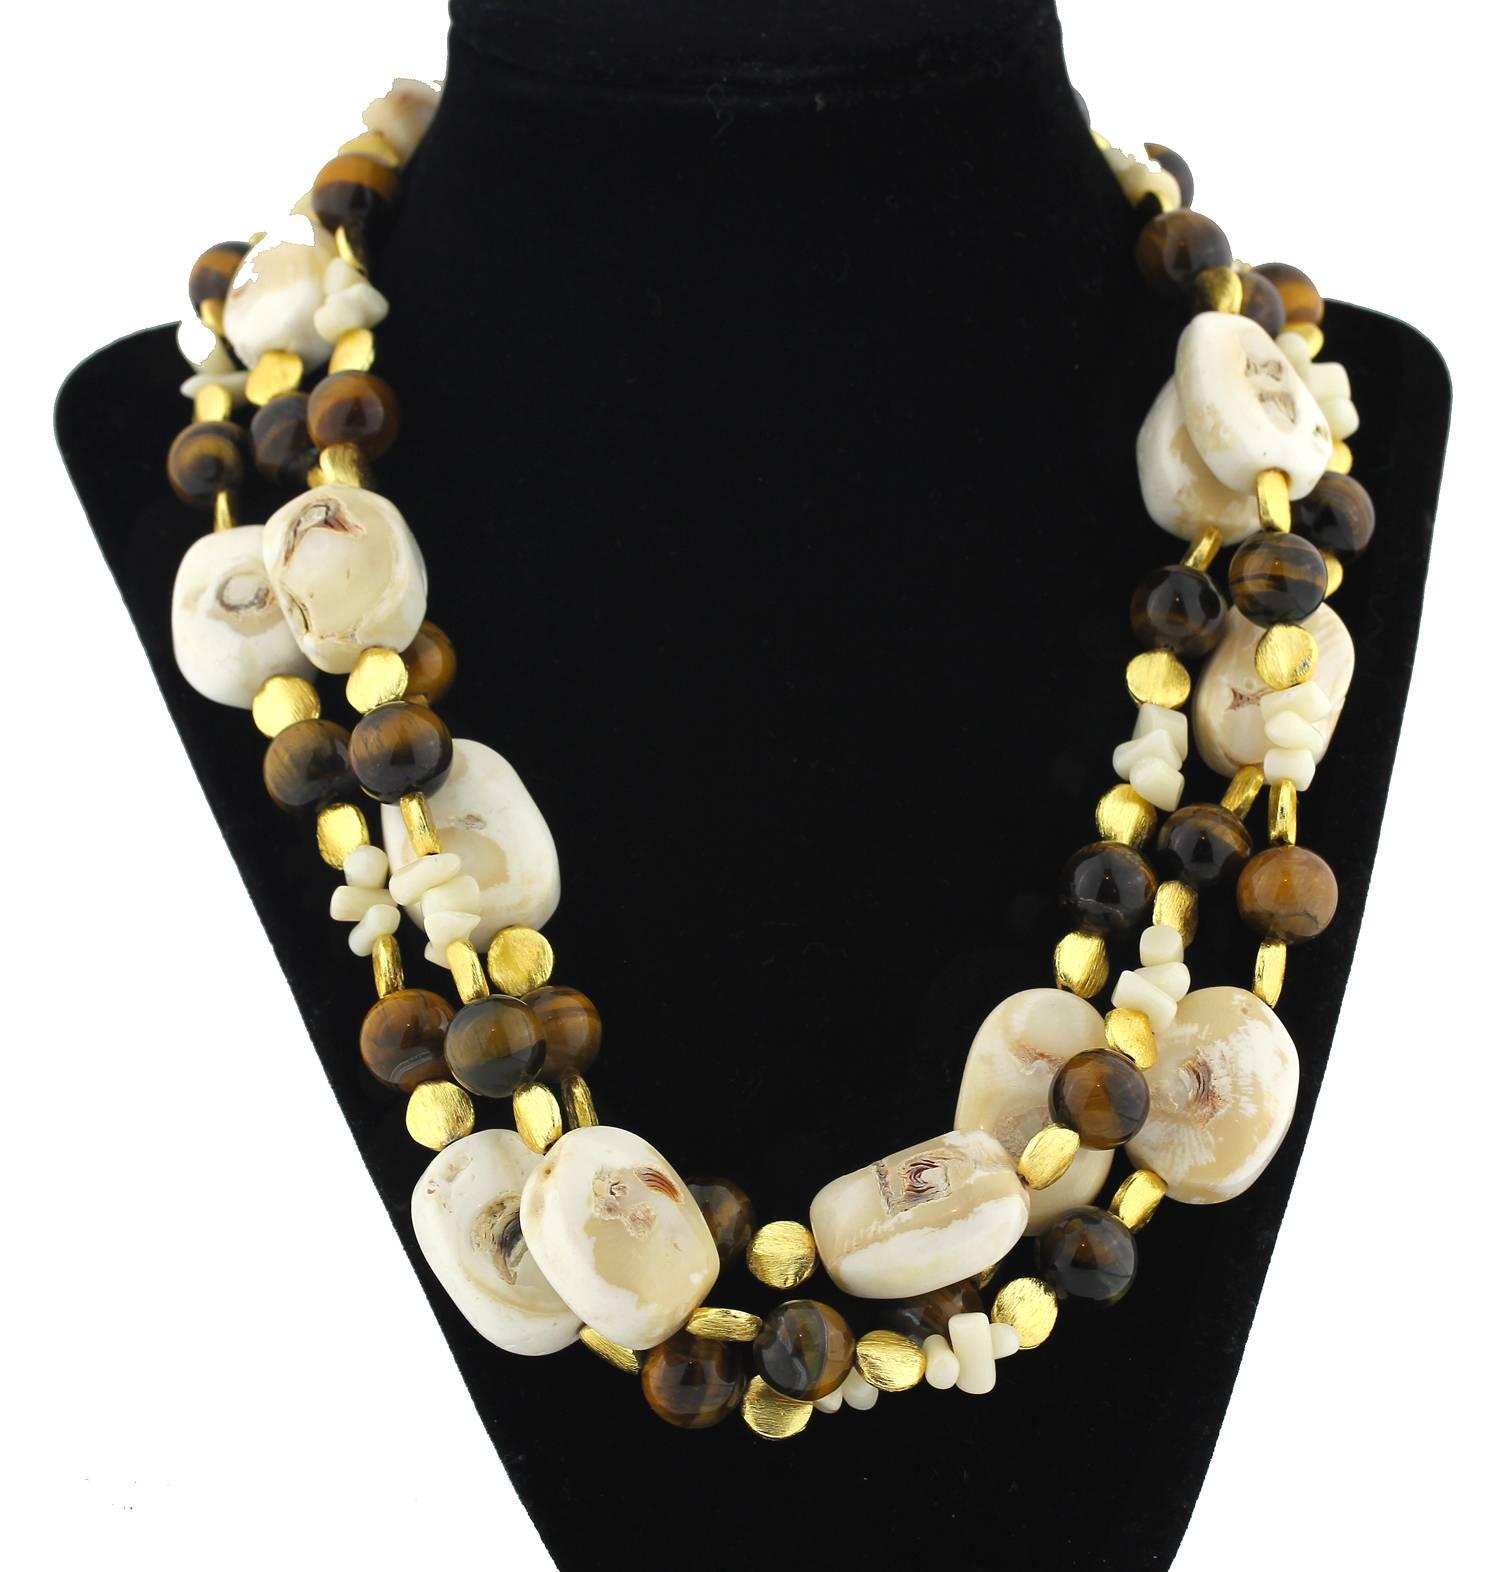 Gemjunky Unique Triple strand Necklace of natural creamy white Coral enhanced with natural brilliant Tiger Eye and gold tone accents handmade necklace. Size:  largest Coral 28 mm;  Length 20 inches
Clasp:  gold tone.  